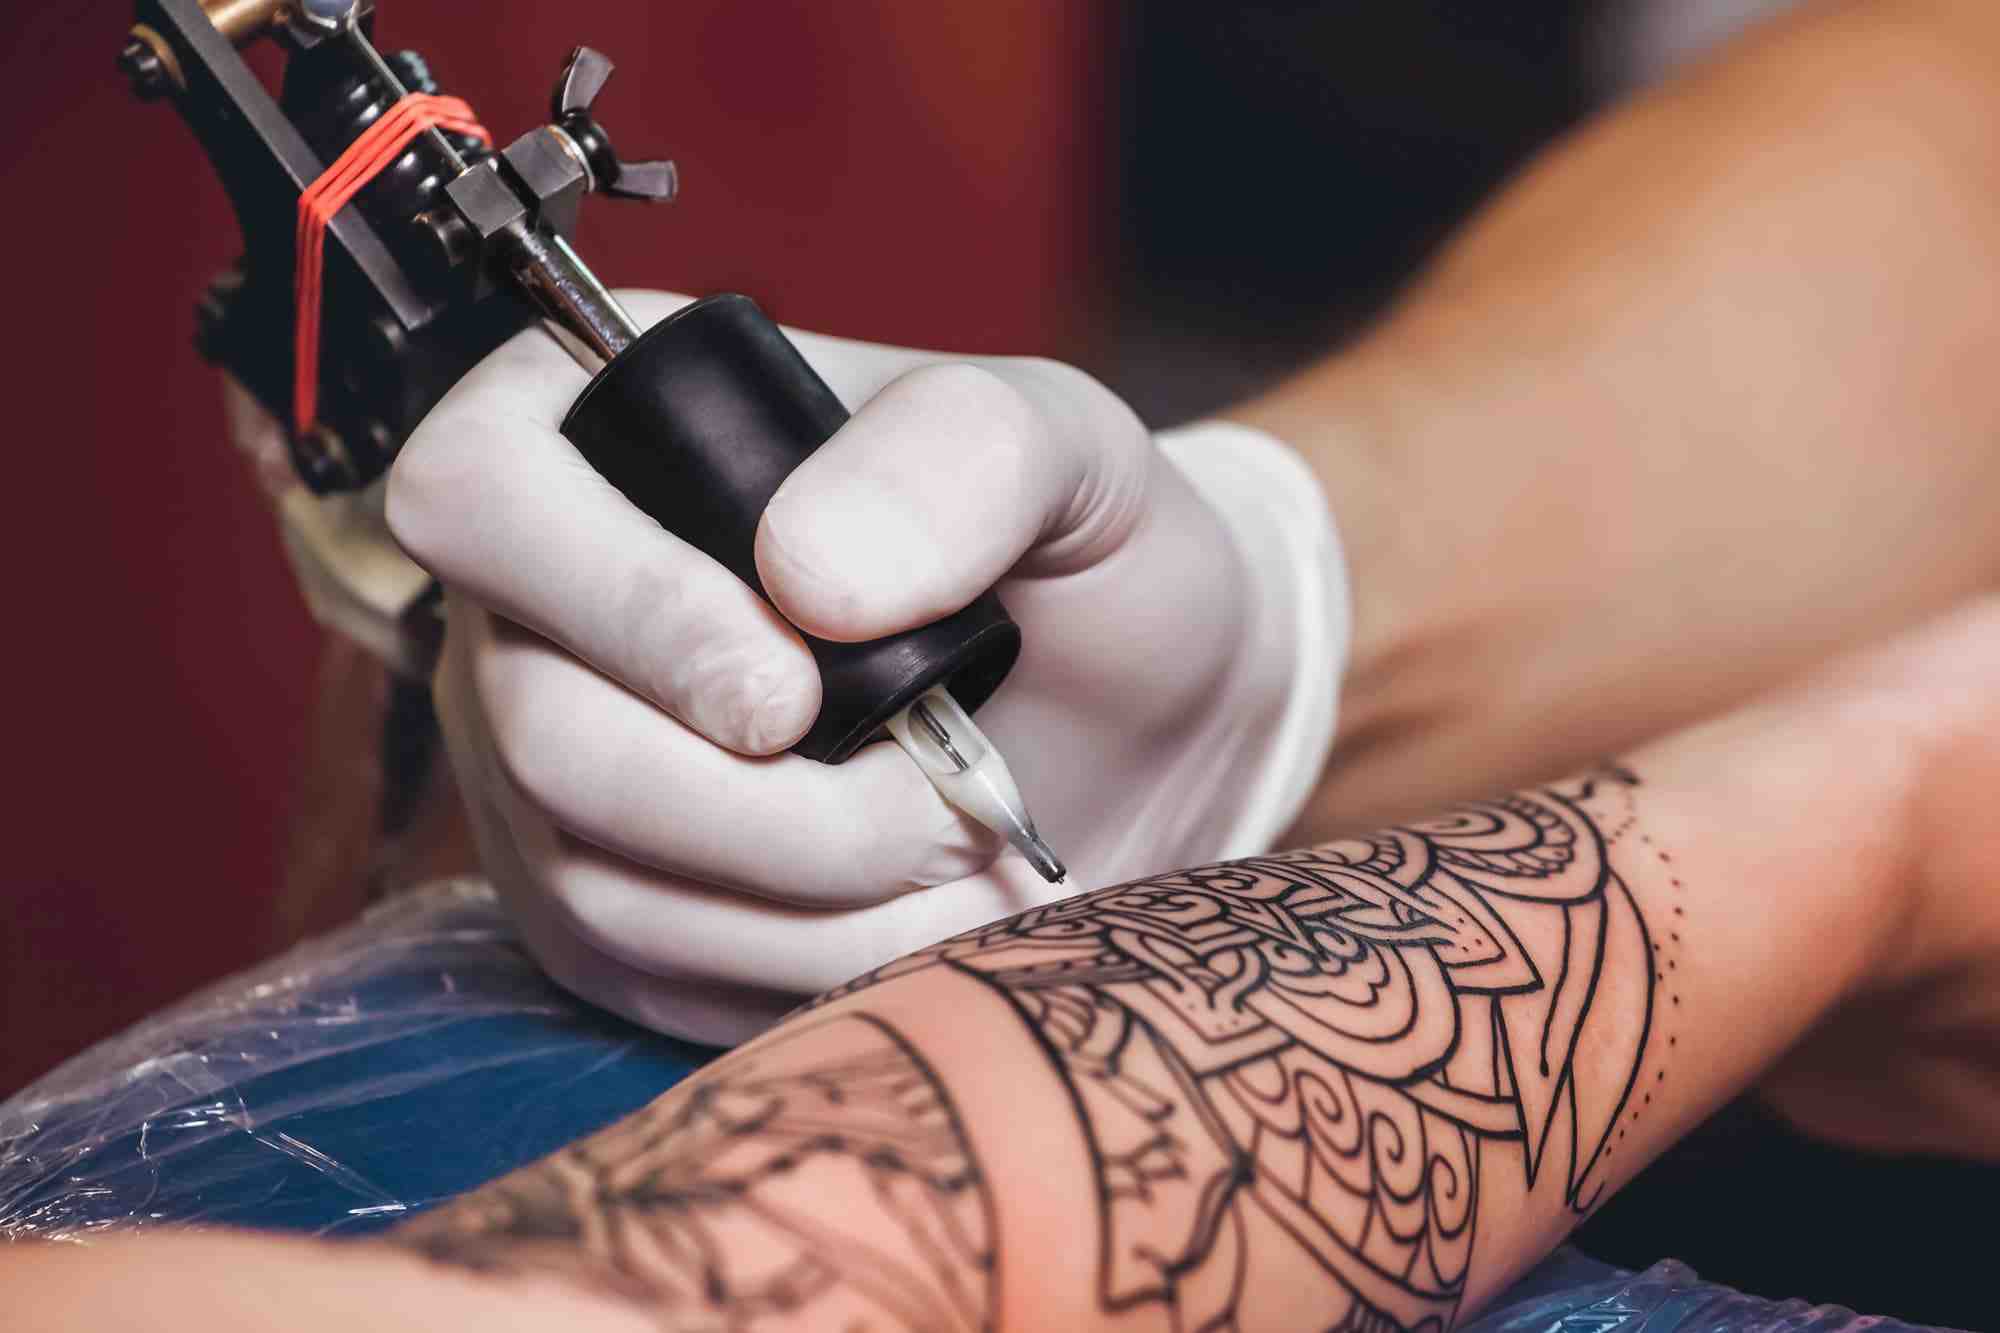 How much do you tip on a $100 tattoo?